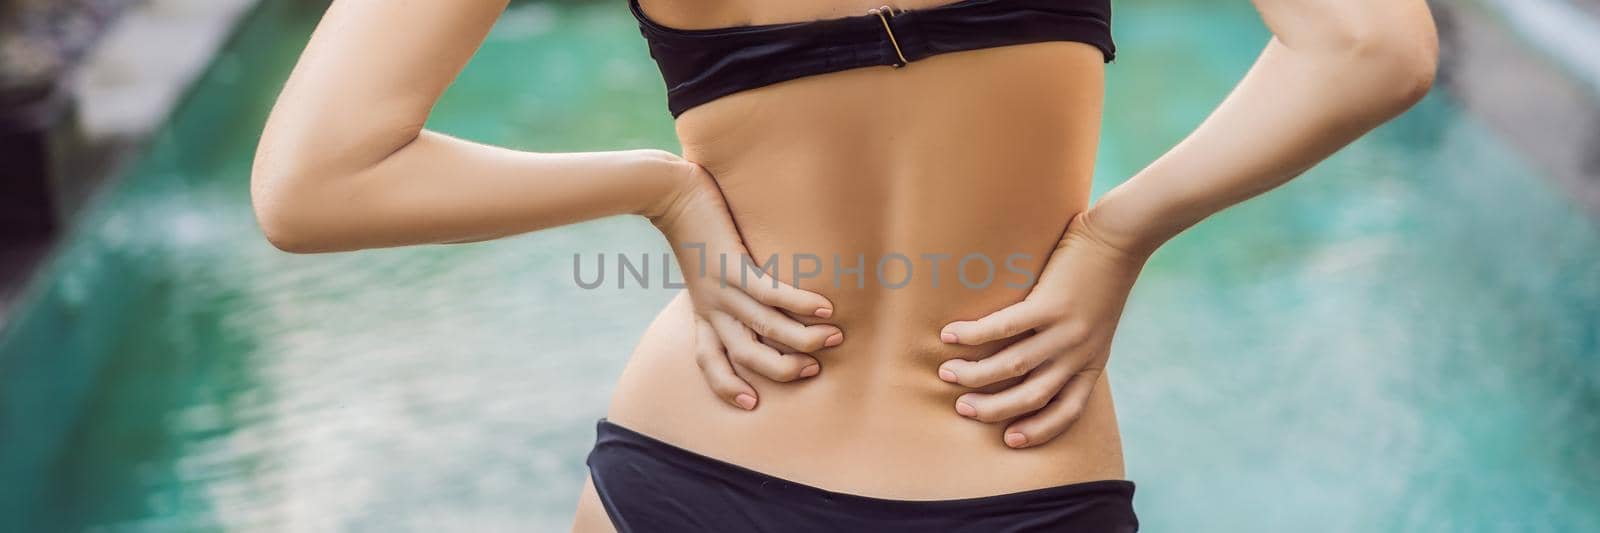 Women's back hurts against the backdrop of the pool. Pool helps with back pain BANNER, LONG FORMAT by galitskaya